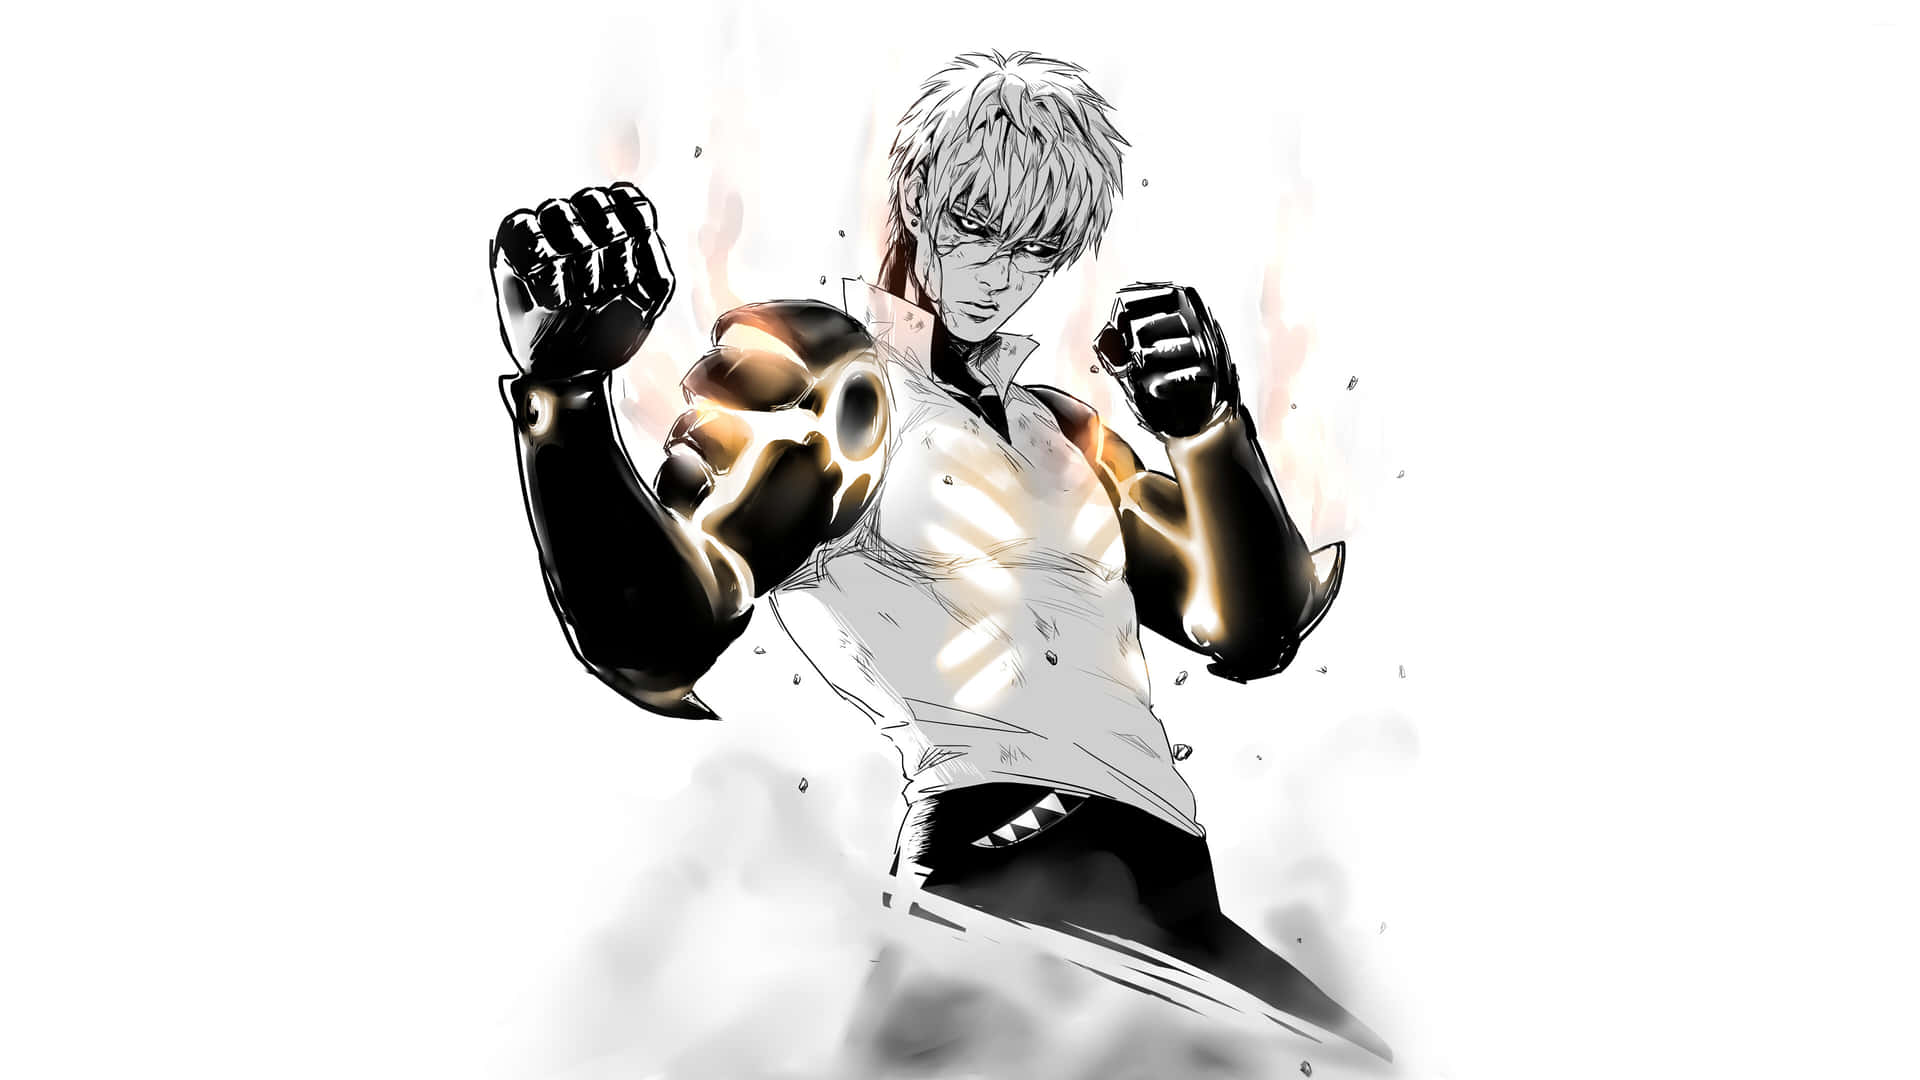 Genos in Action - A Powerful Cyborg Hero Wallpaper